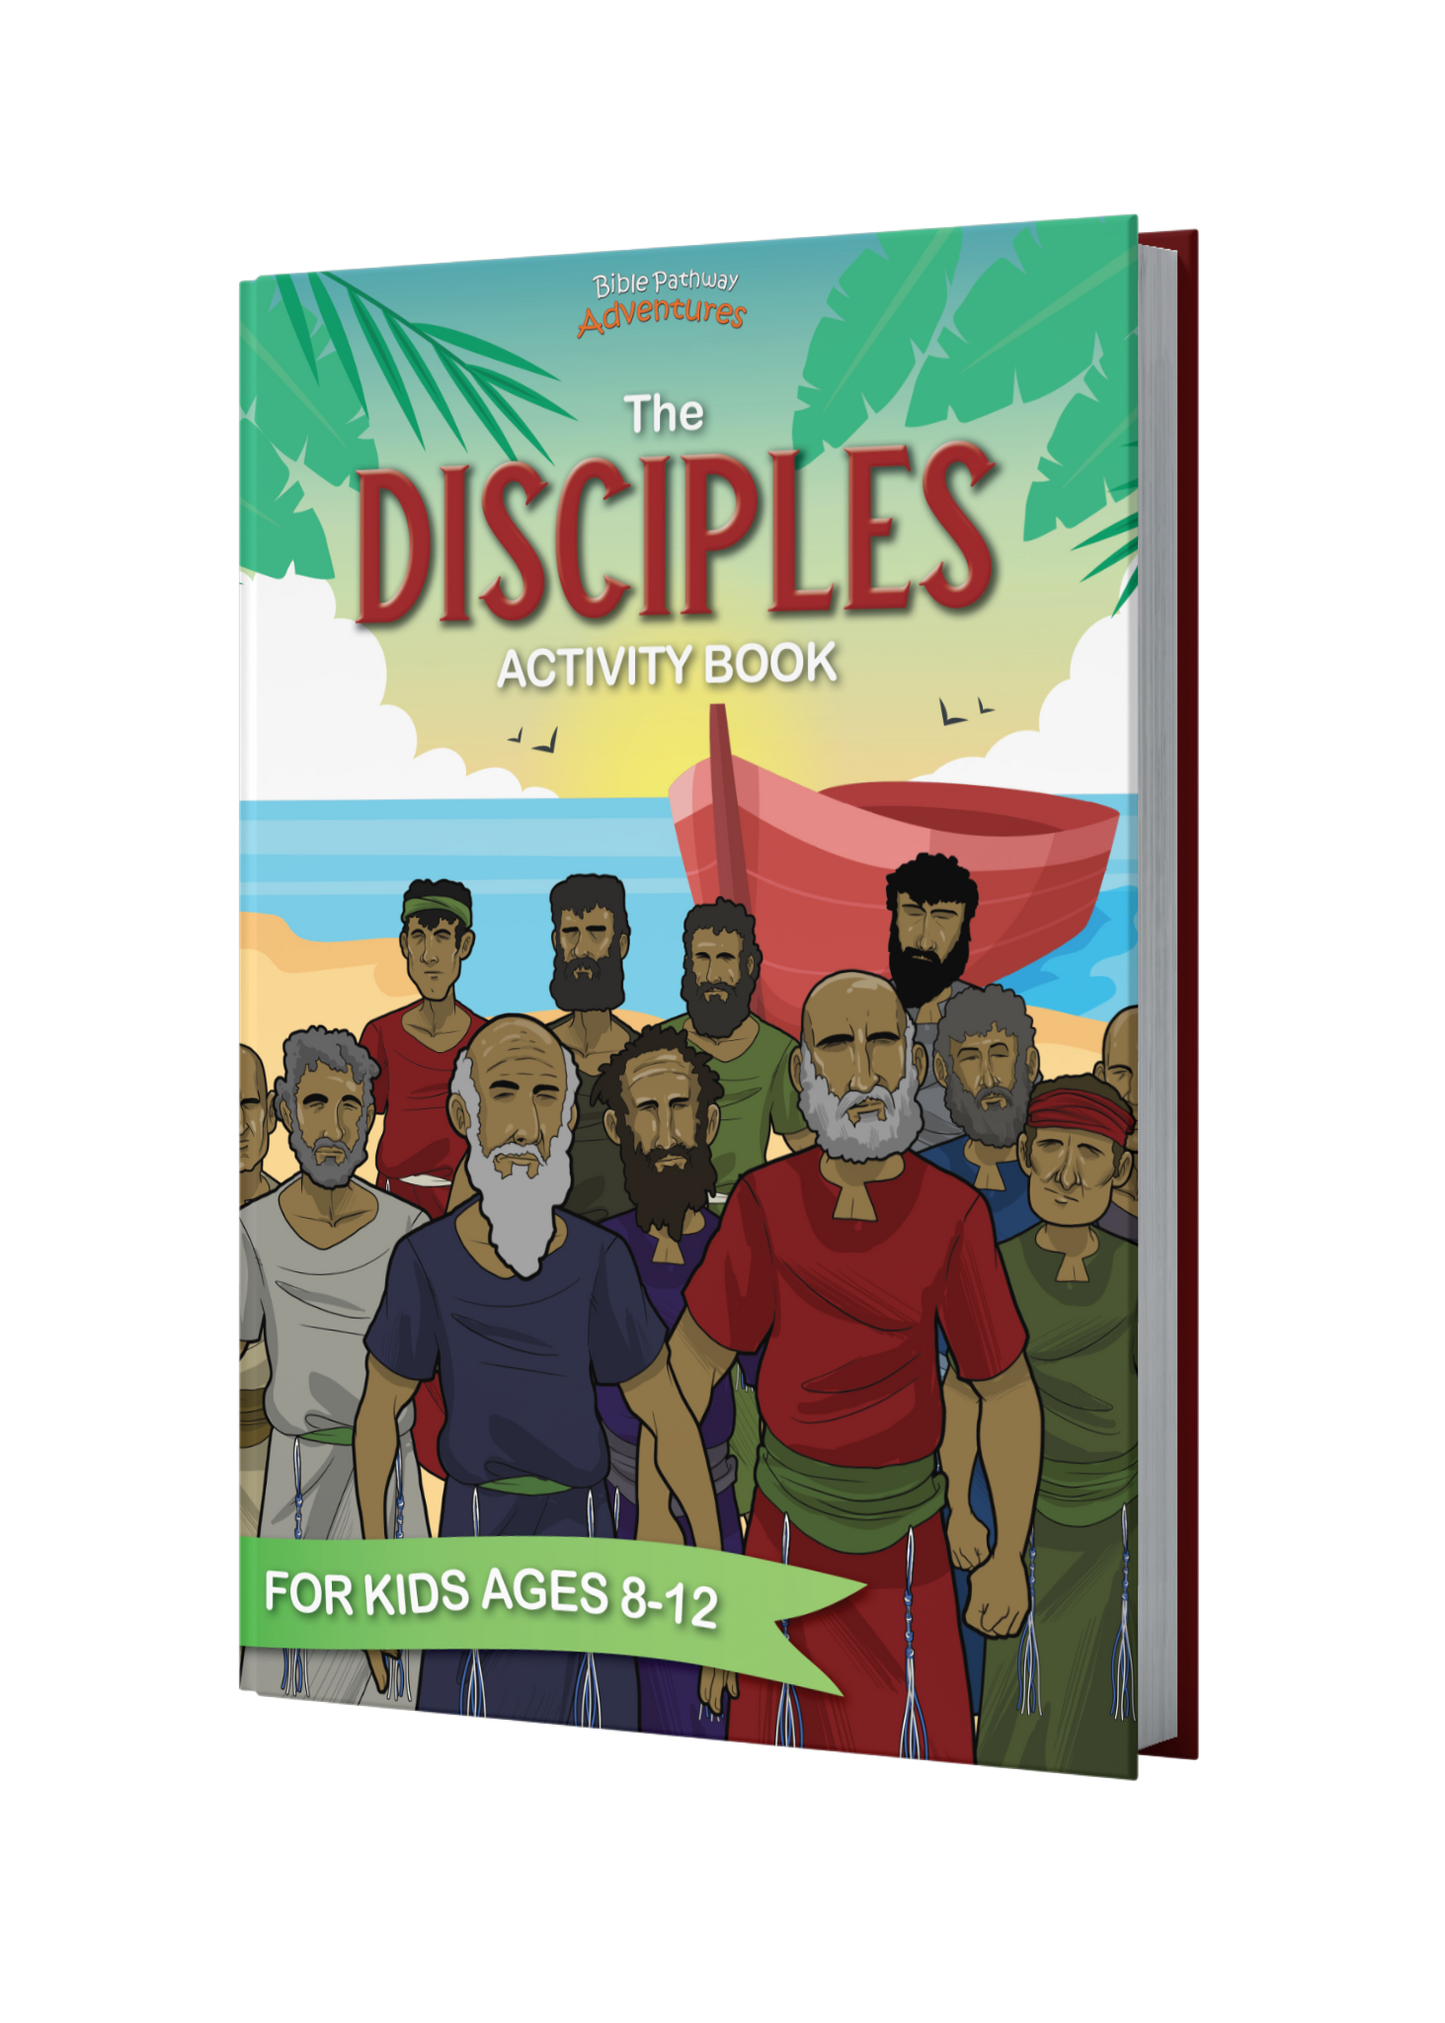 The Disciples Activity Book (paperback)